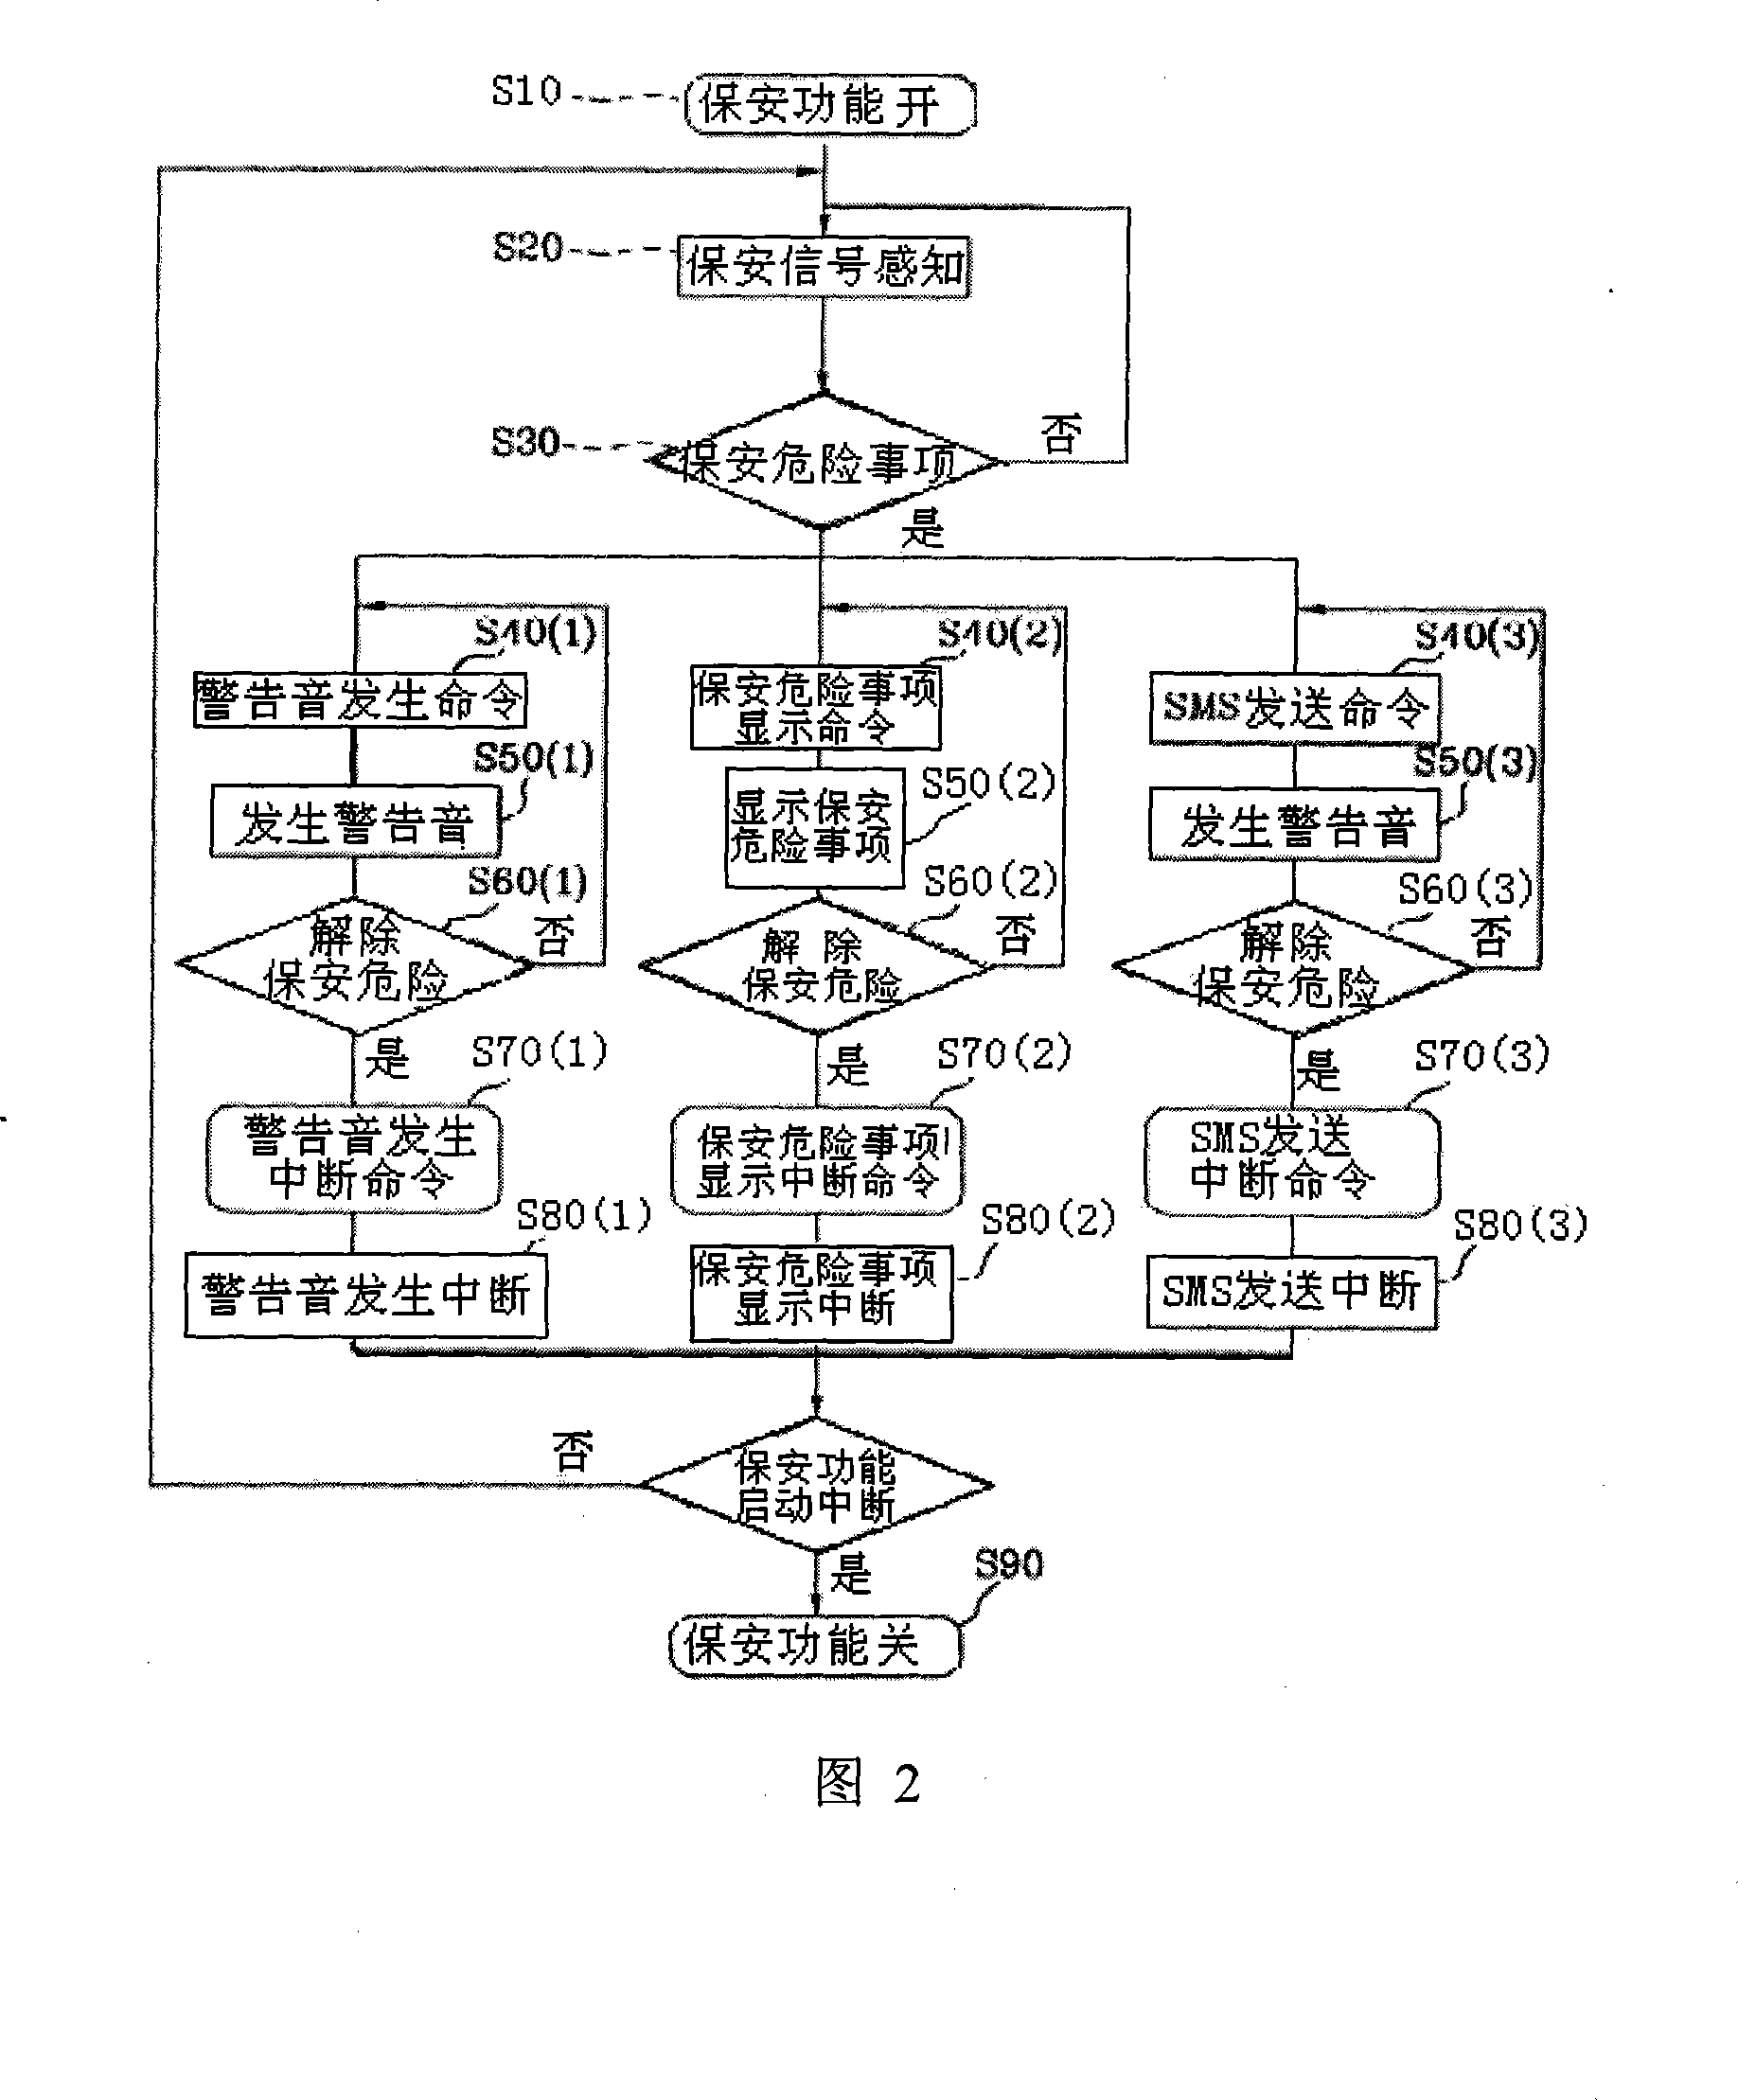 Appliance production with protection function